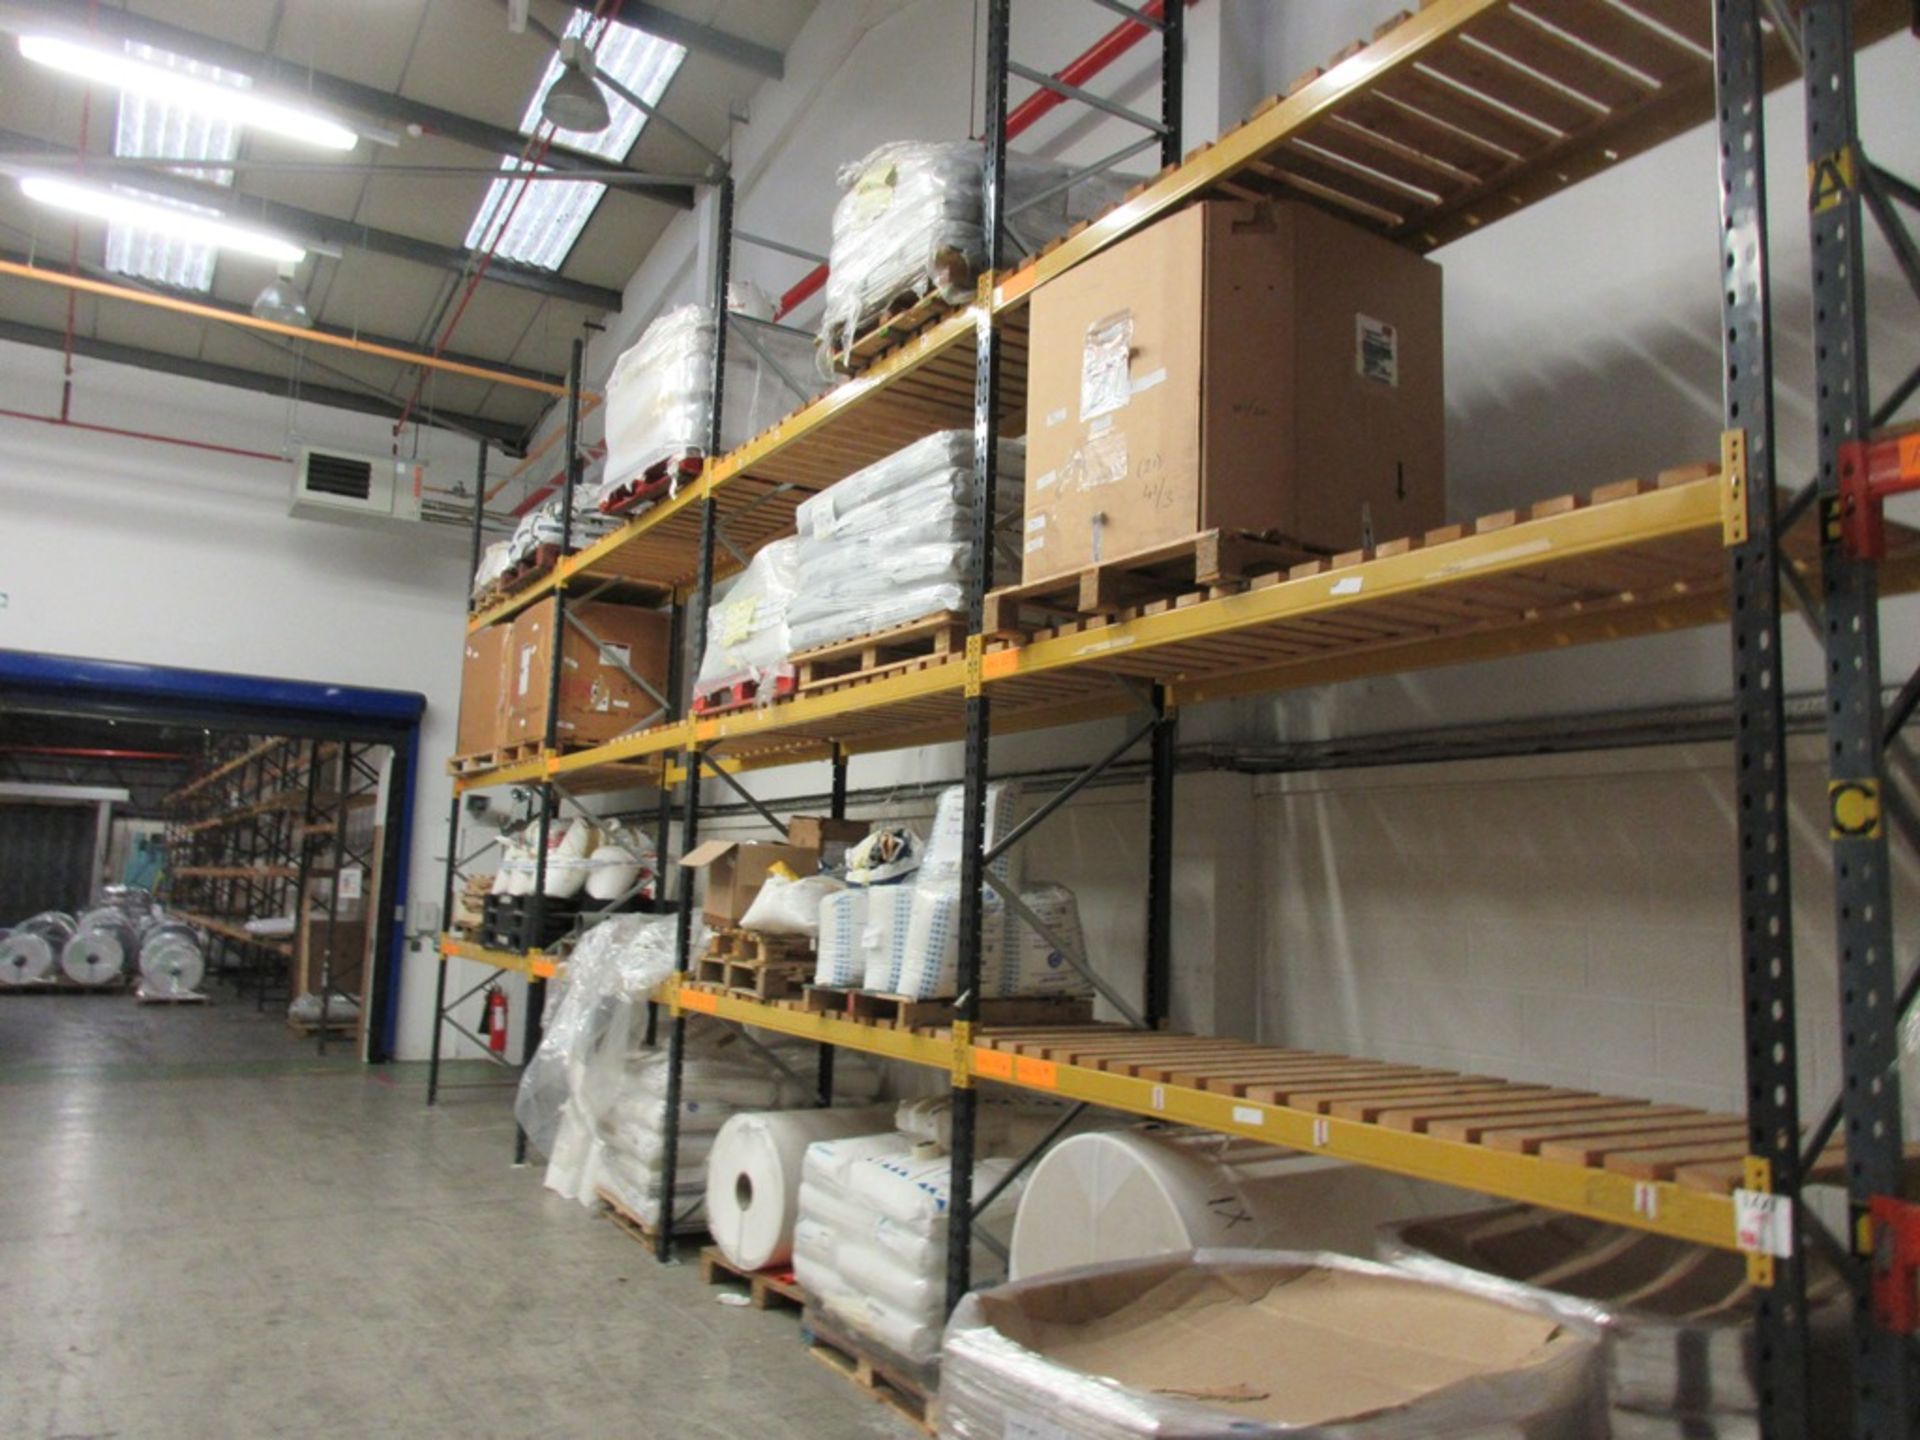 Six bays of boltless adjustable pallet racking, approx. sizes: 2.6m x 900mm x H: 5m - excluding